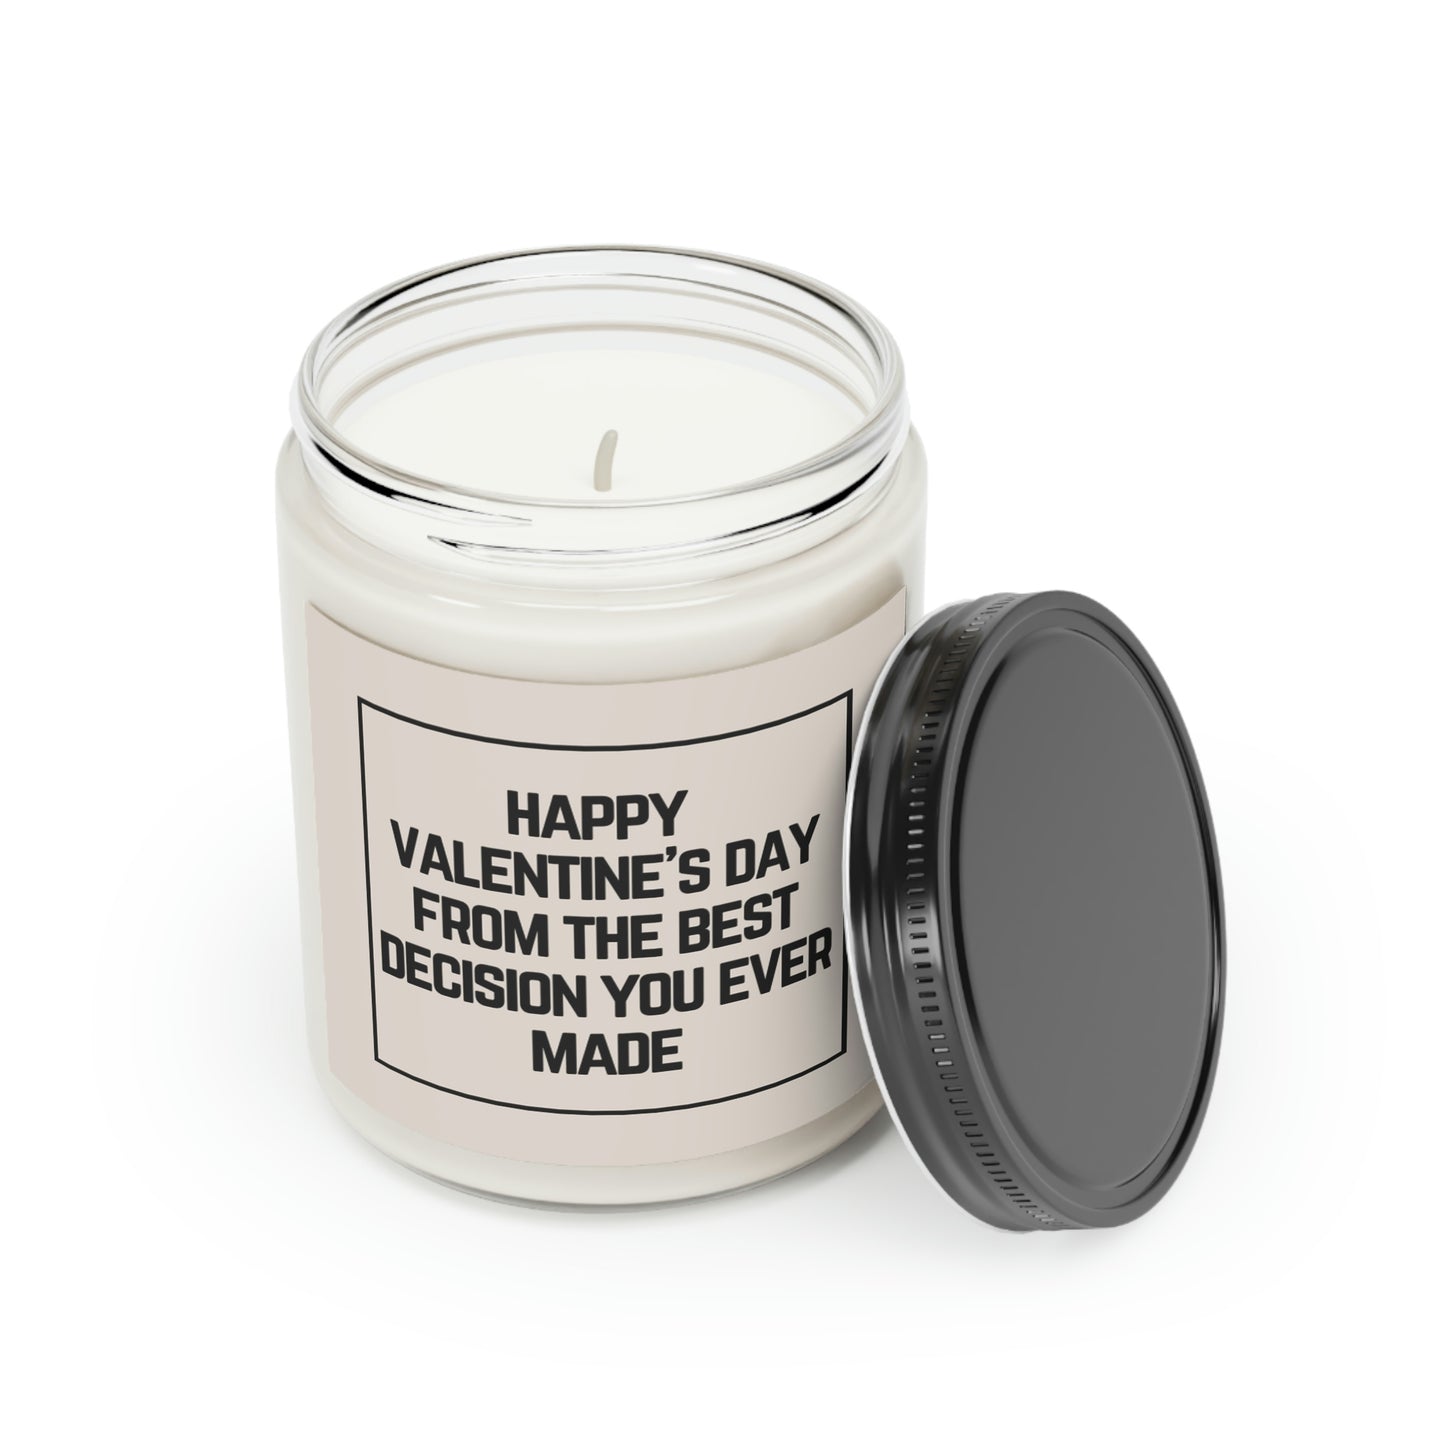 Happy Valentine's Day From The Best Decision You Ever Made, Scented Candle, 9oz